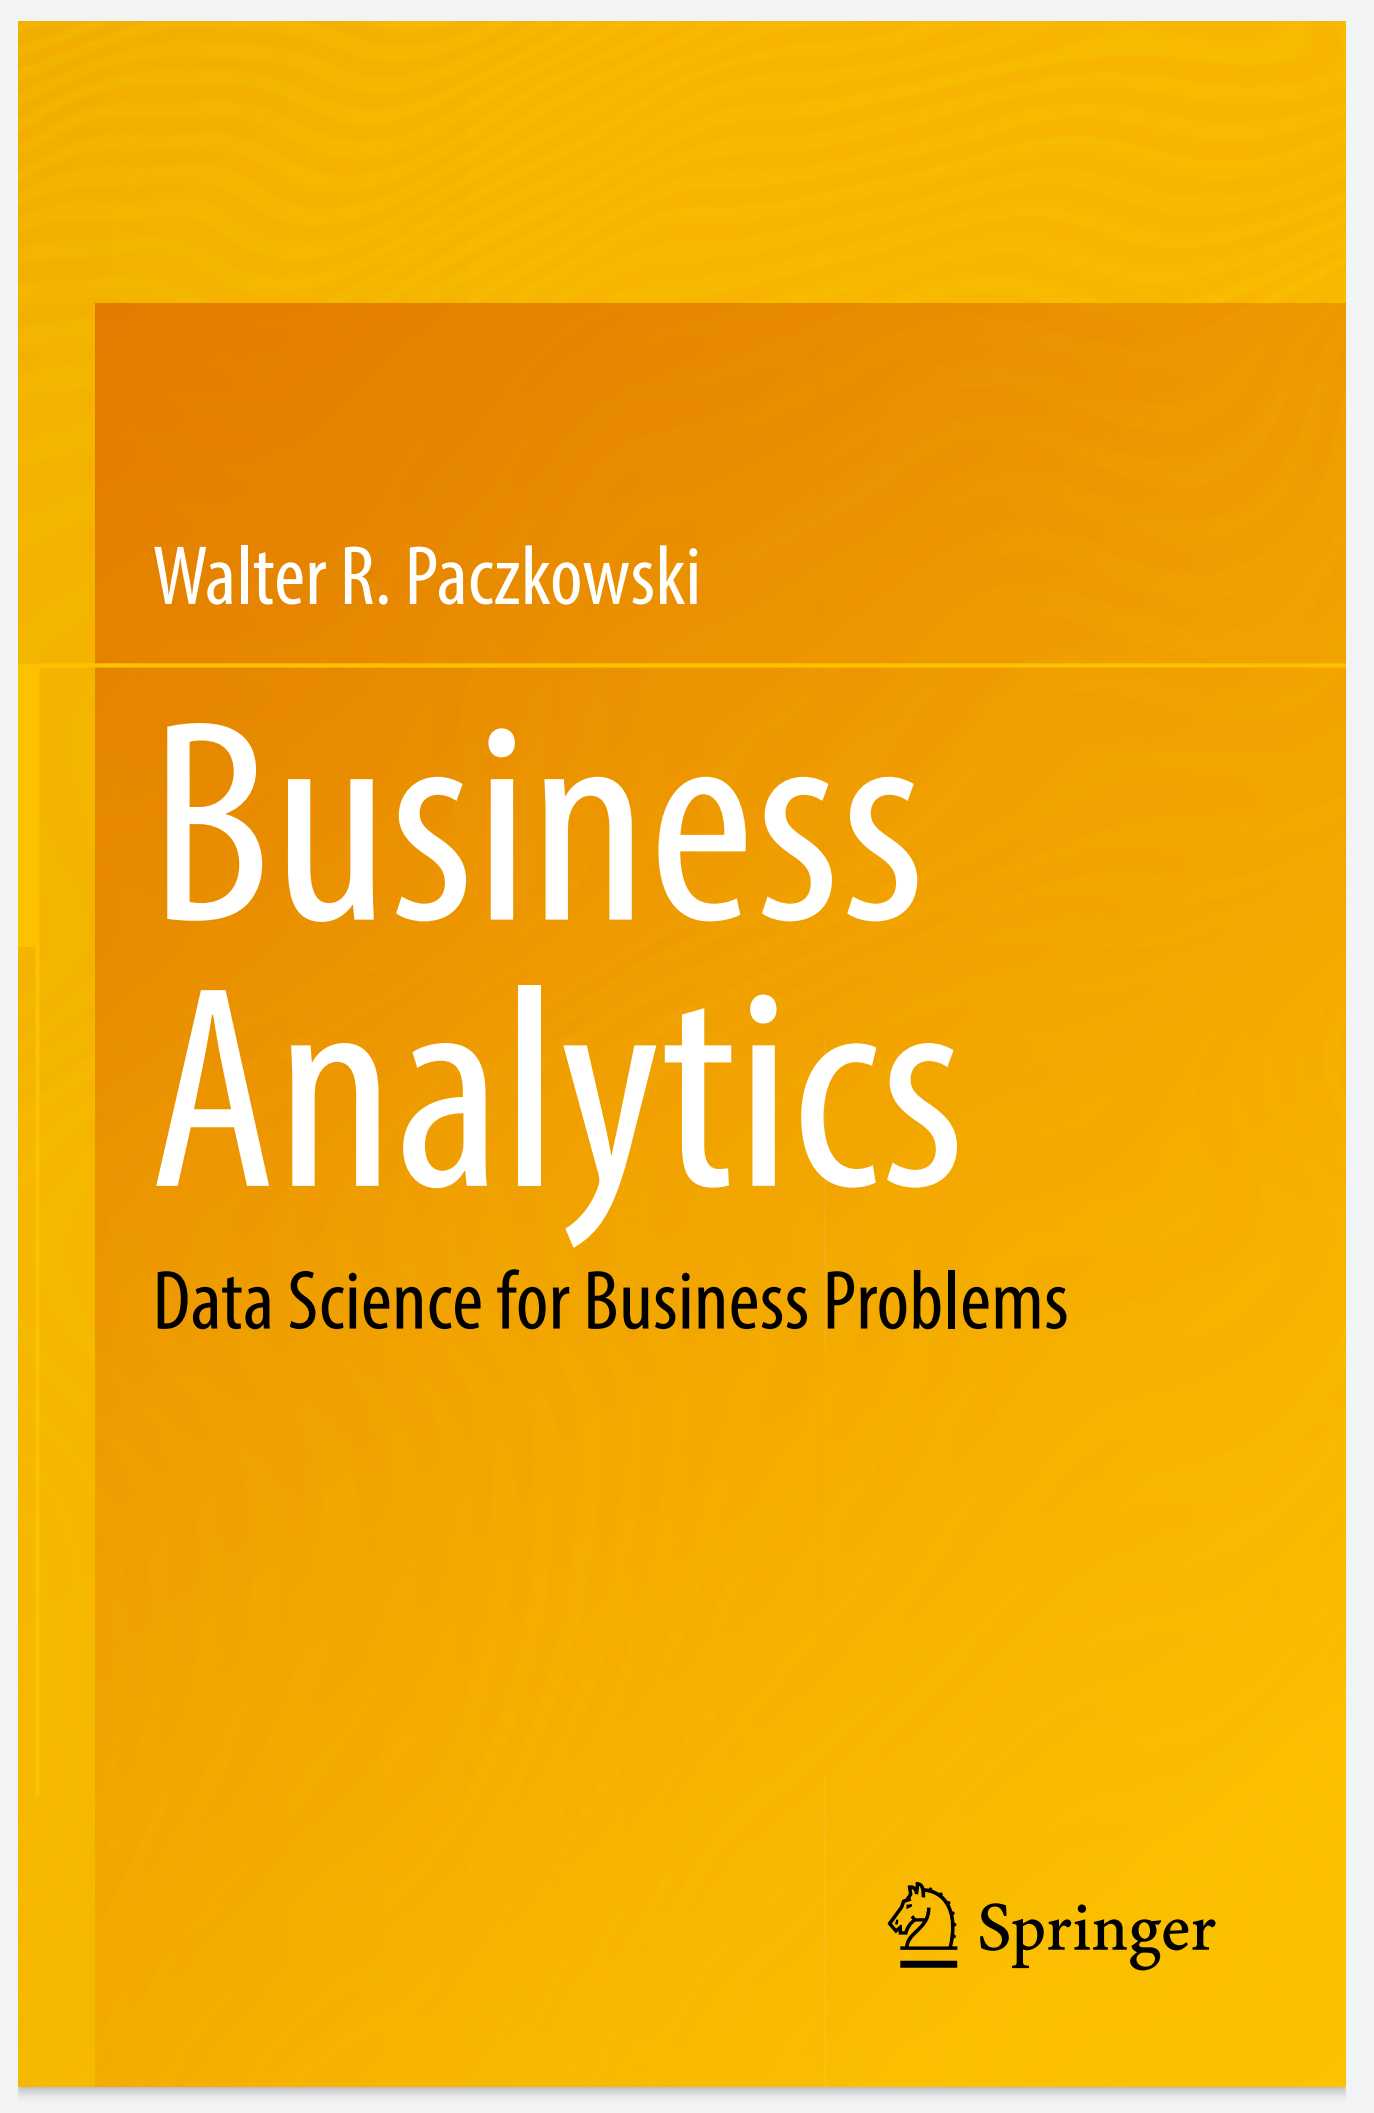 Business Analytics: Data Science for Business Problems 2022